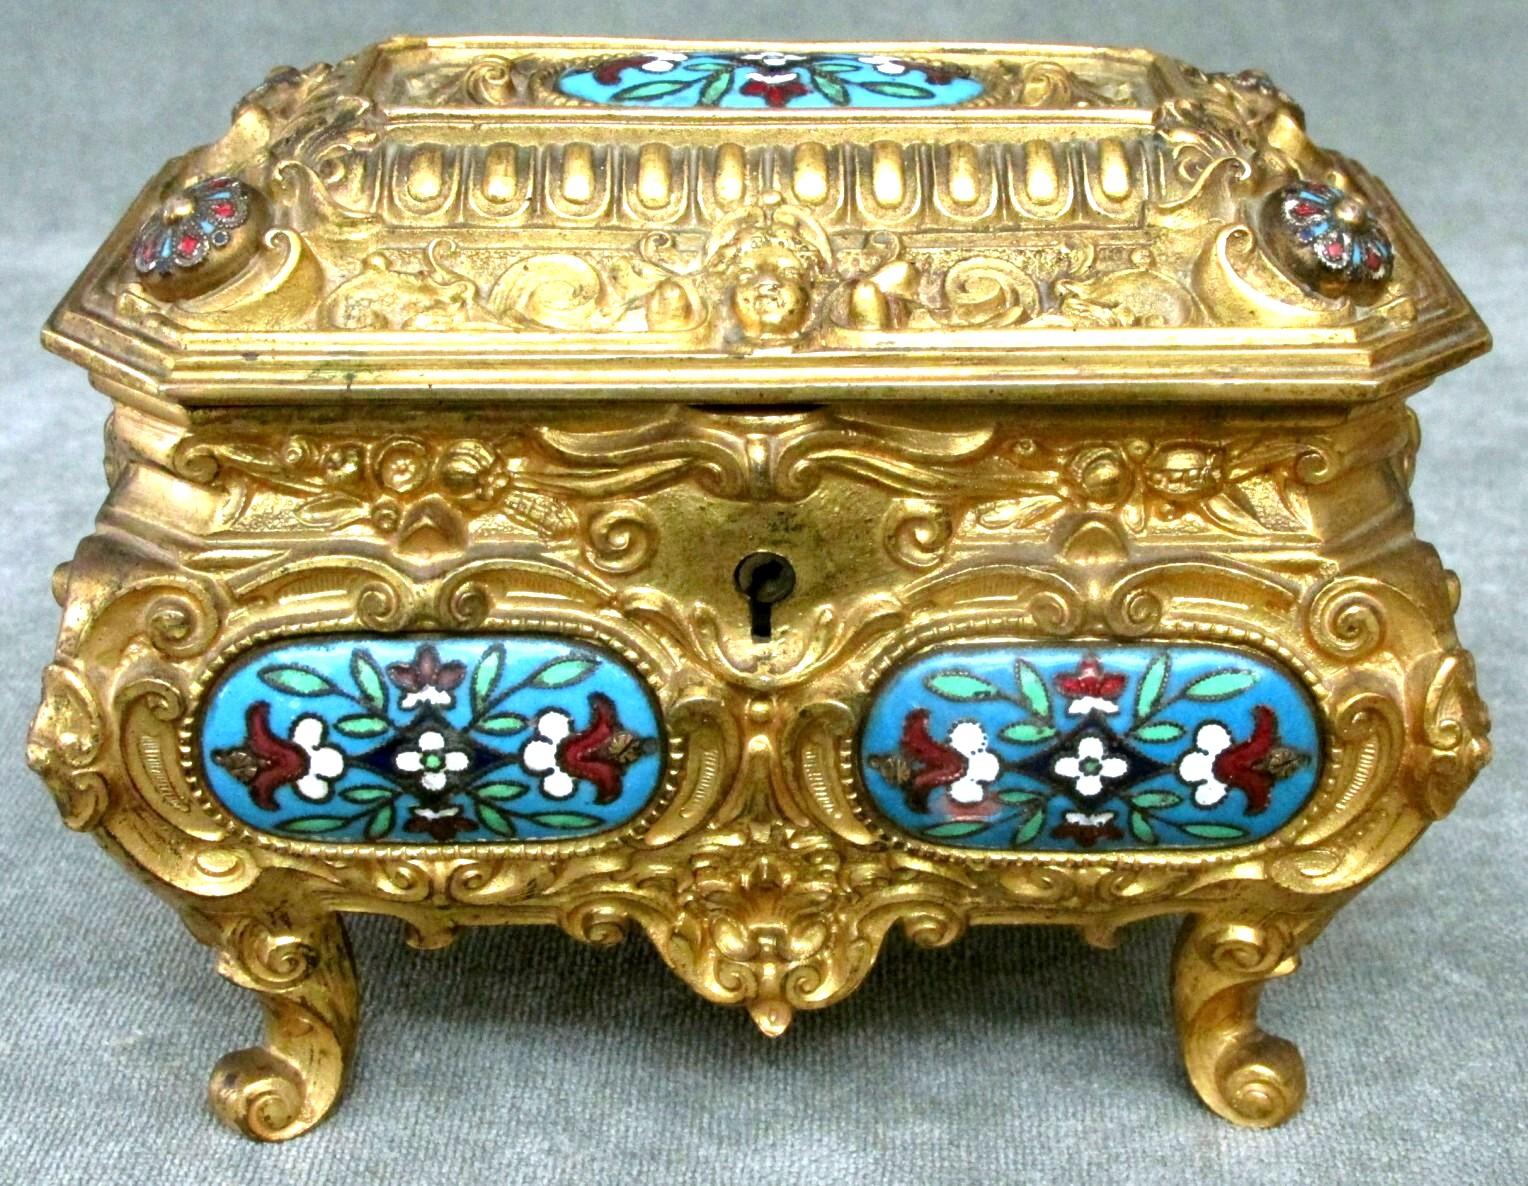 The richly gilded bombe-shaped body decorated overall with foliate and scrolled elements, the front, sides and hinged top inset with turquoise enamel panels decorated with floral geometric motifs, the lid opening to a velvet lined interior, raised